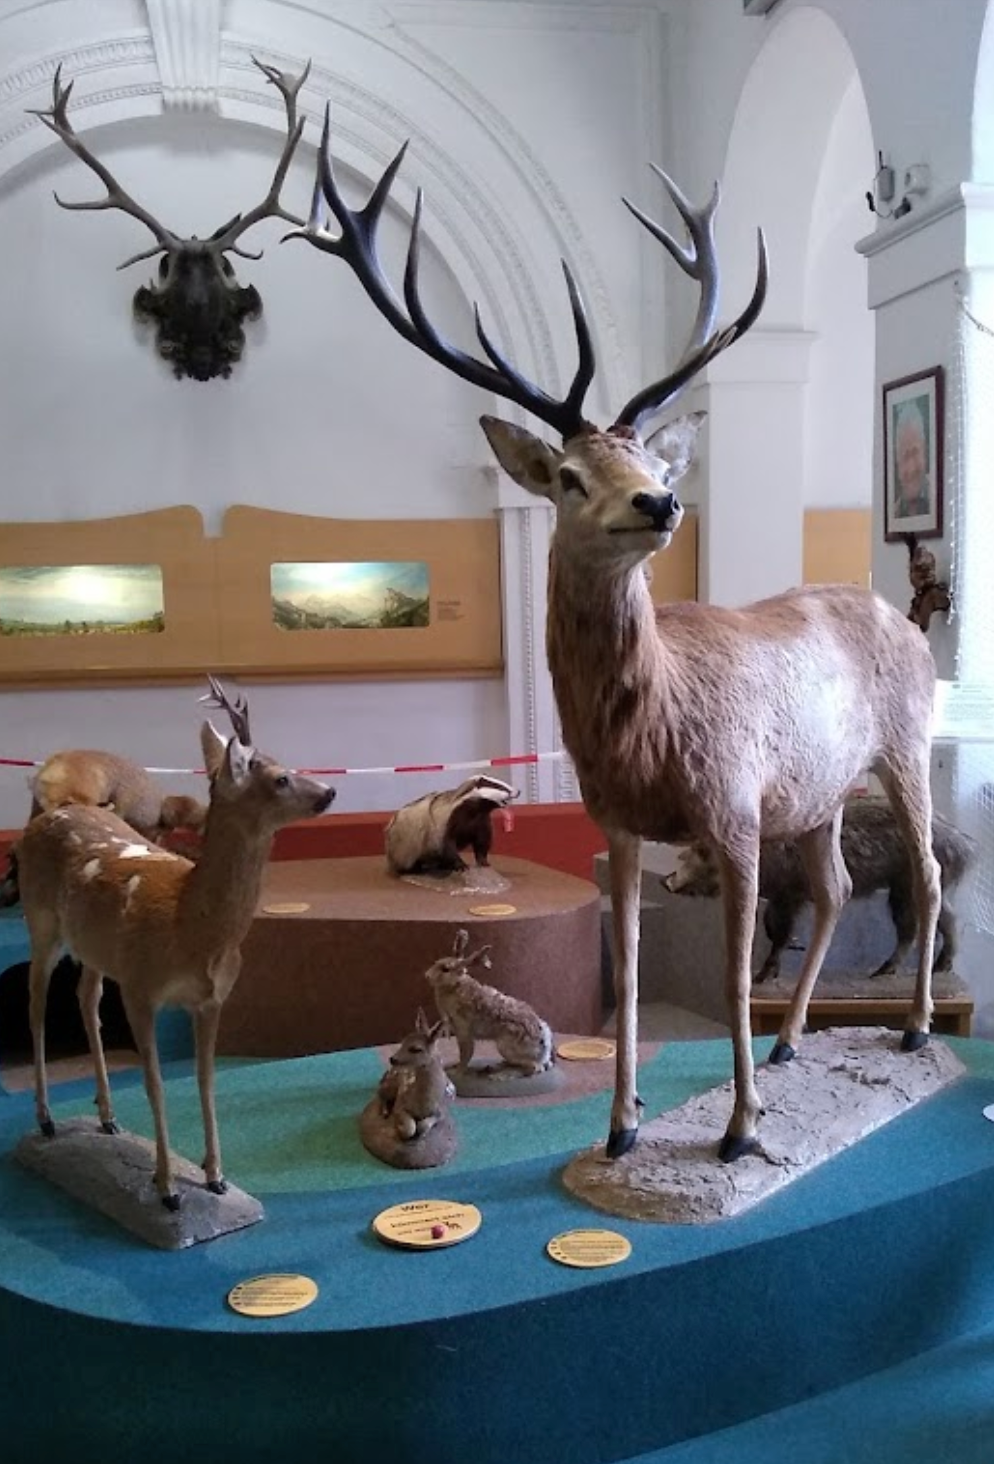 German Hunting and Fishing Museum